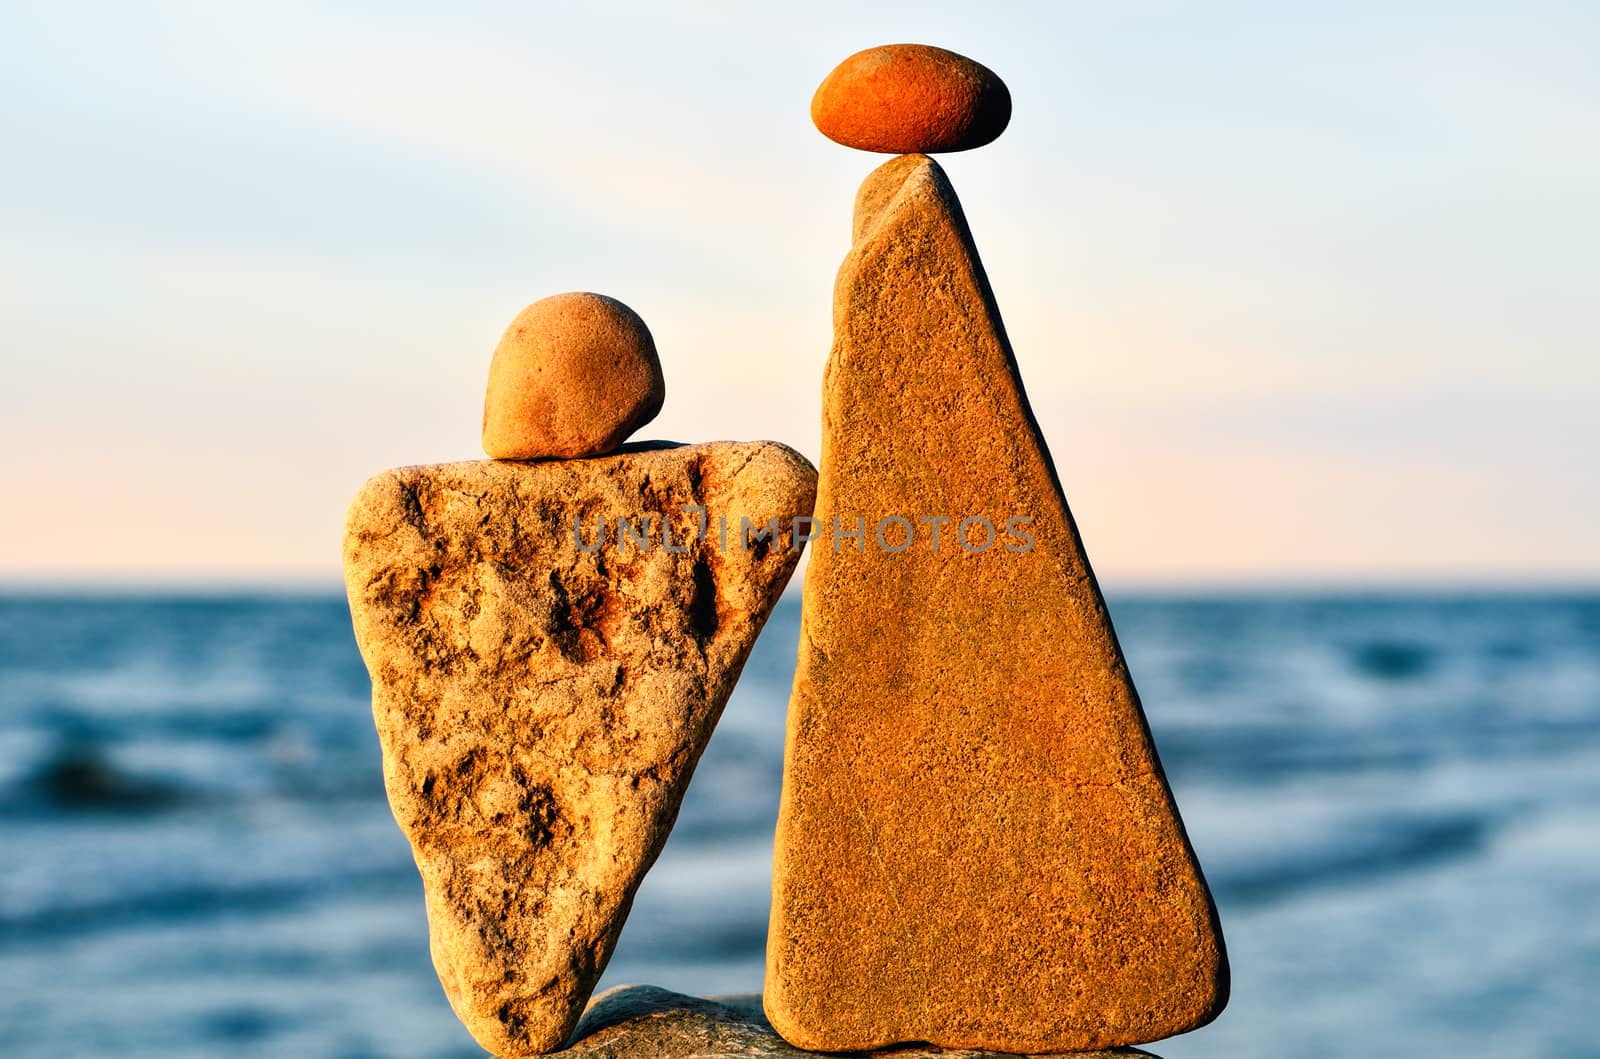 Balancing of two triangle stones on the seacoast